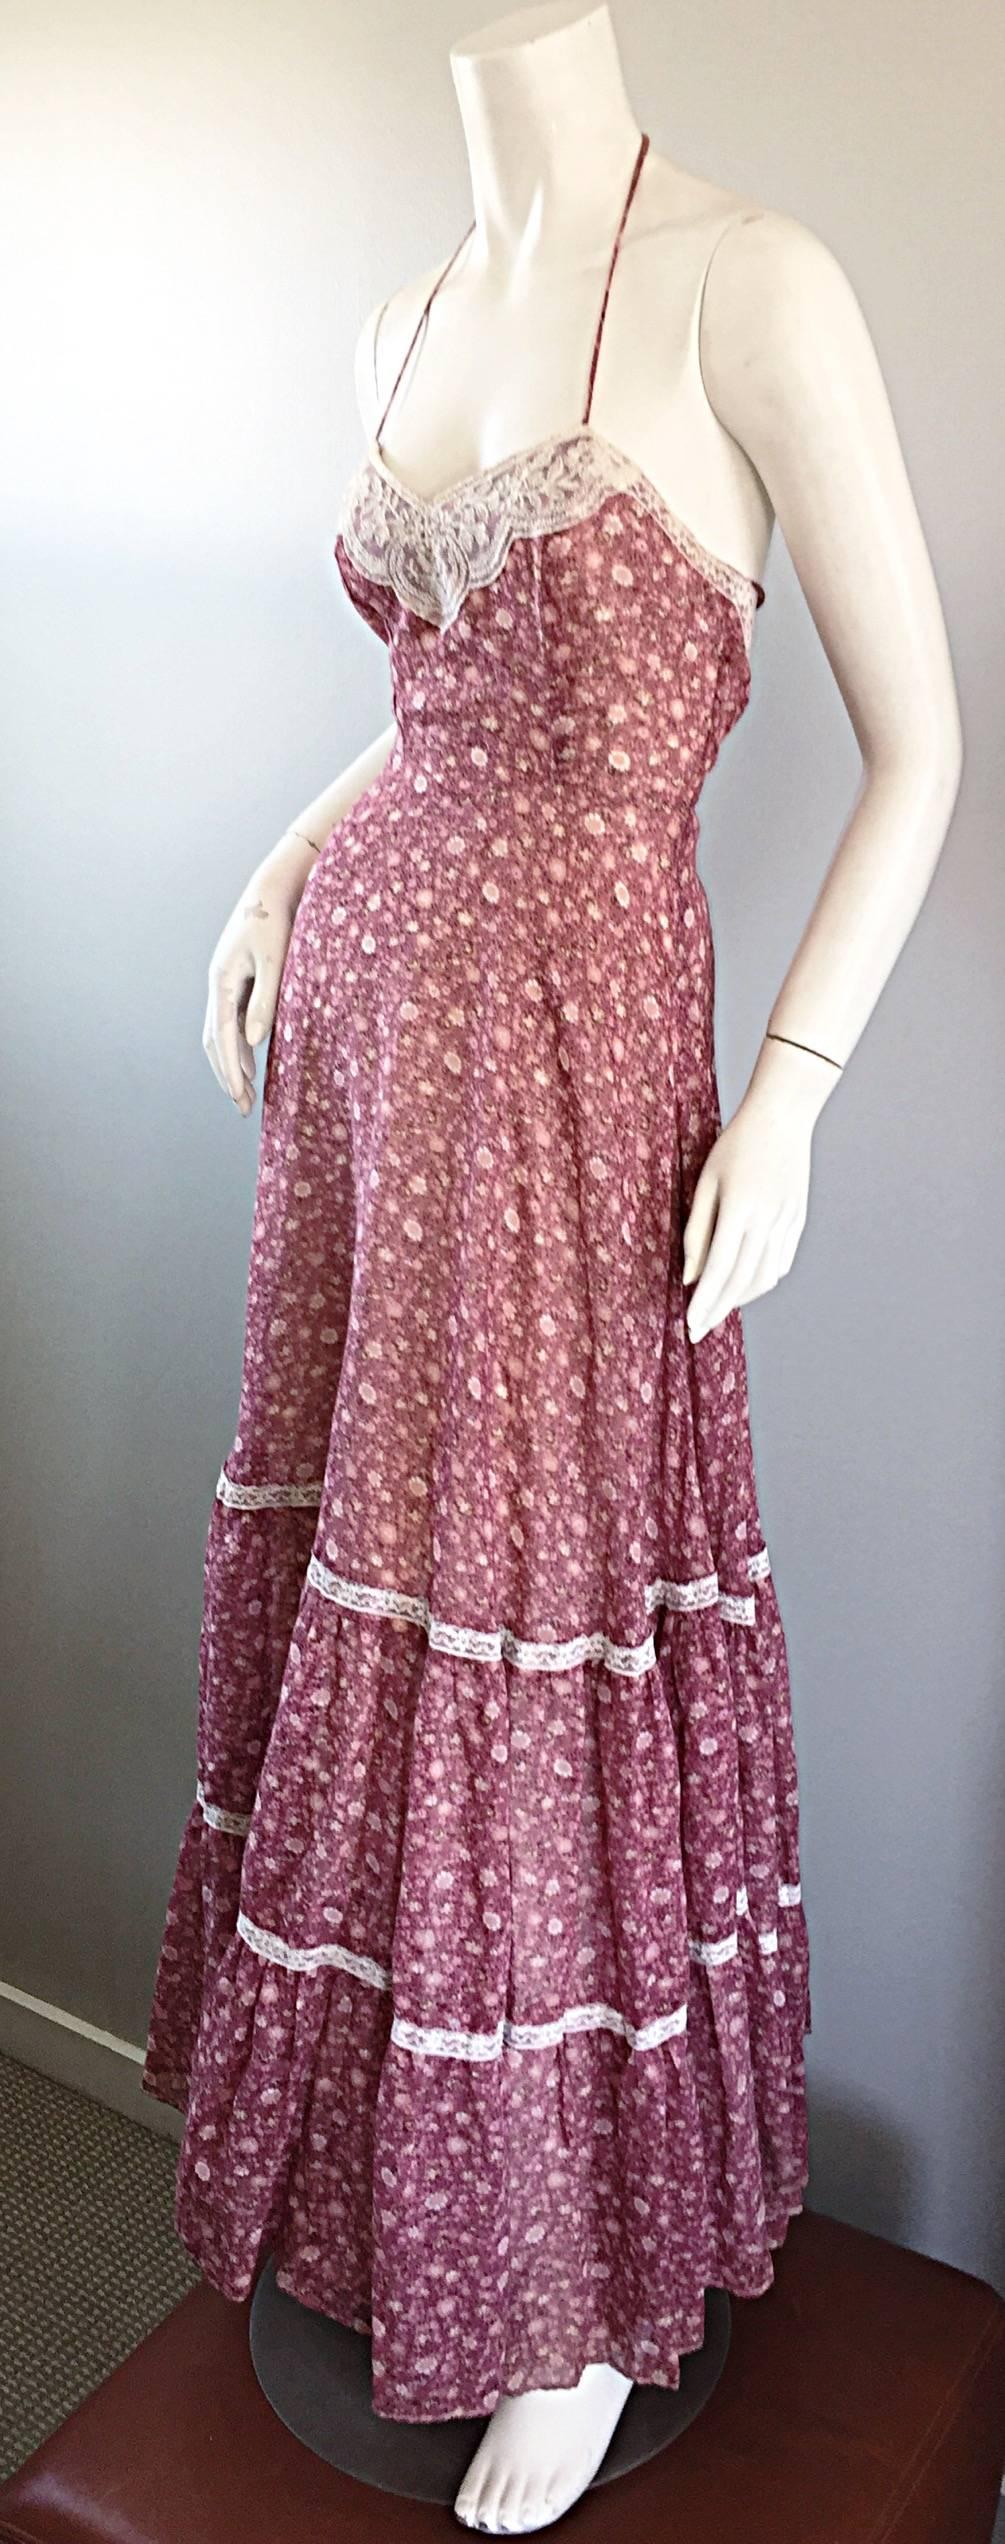 Women's Vintage Boho 1970s Cotton Voile Raspberry Pink and Ivory Lace Halter Maxi Dress